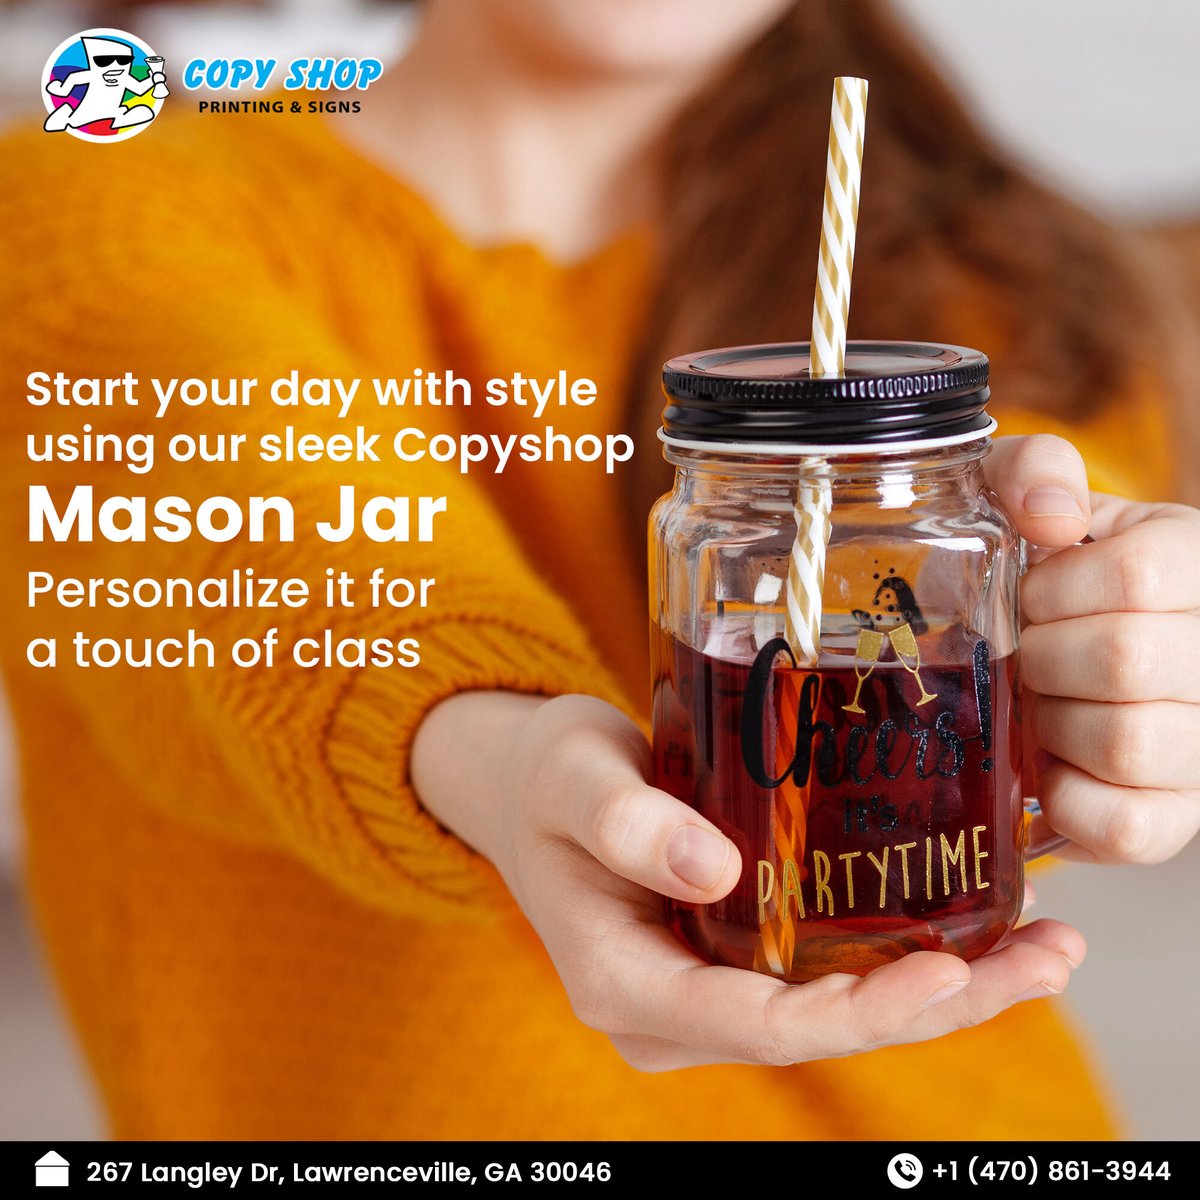 Sip in style with custom-printed Mason jars from Copy Shop! Your imagination, our printing expertise.
#copyshop #copyshopprinting #printing #masonjar #masonjars #customizedmasonjar #personalisedmasonjar #branding #designing #brandidentity #marketing #businessowner #bestofgwinnett